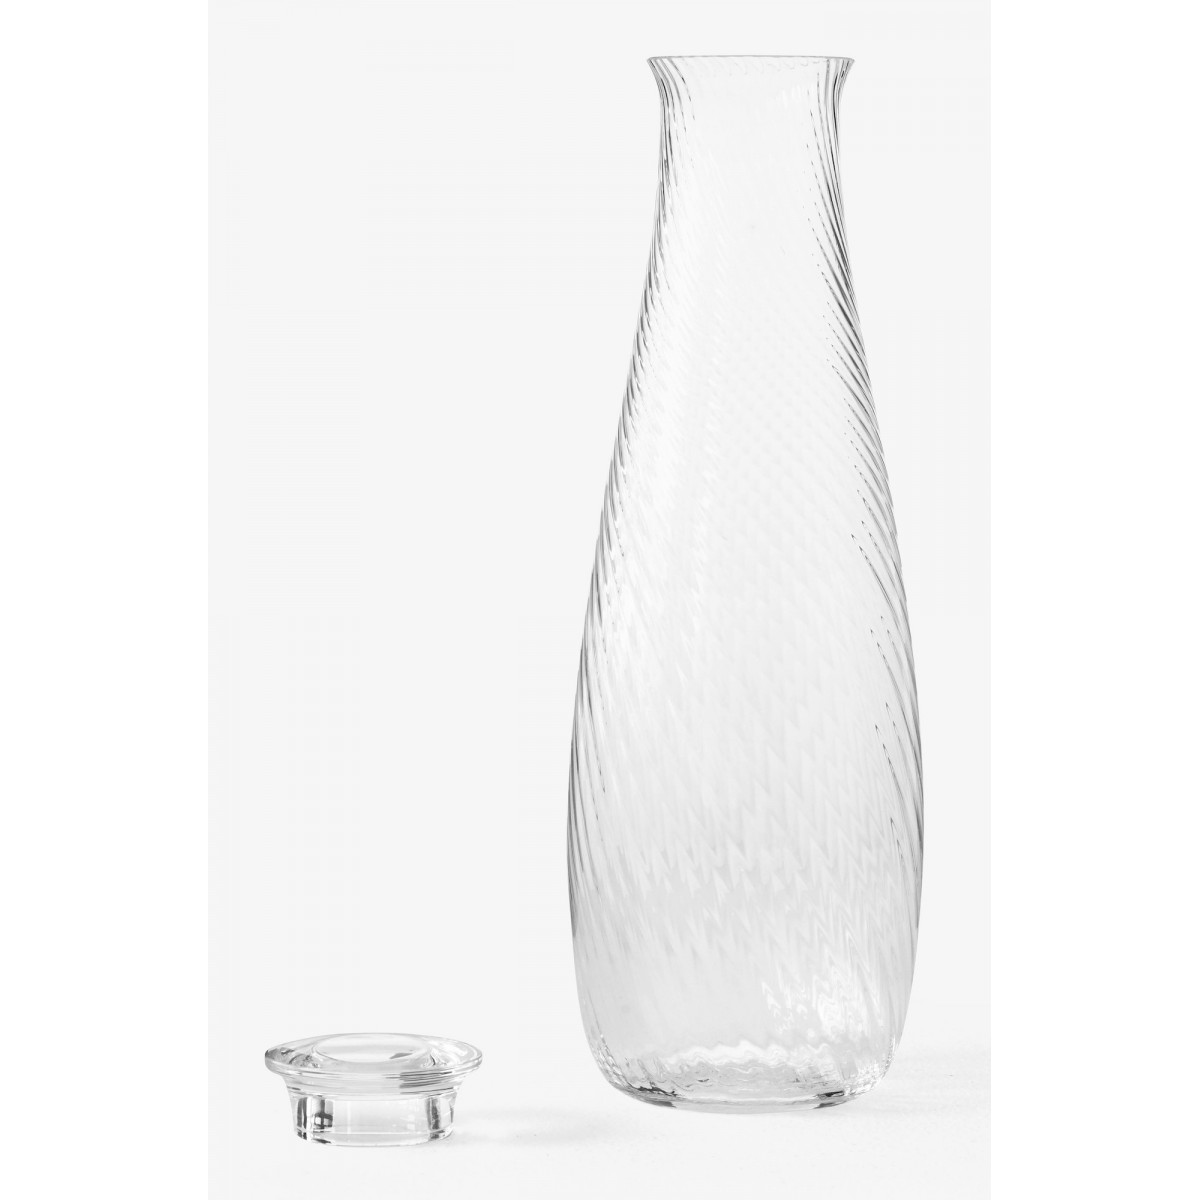 Carafe Collect 0.8l Clear – SC62 - OFFER